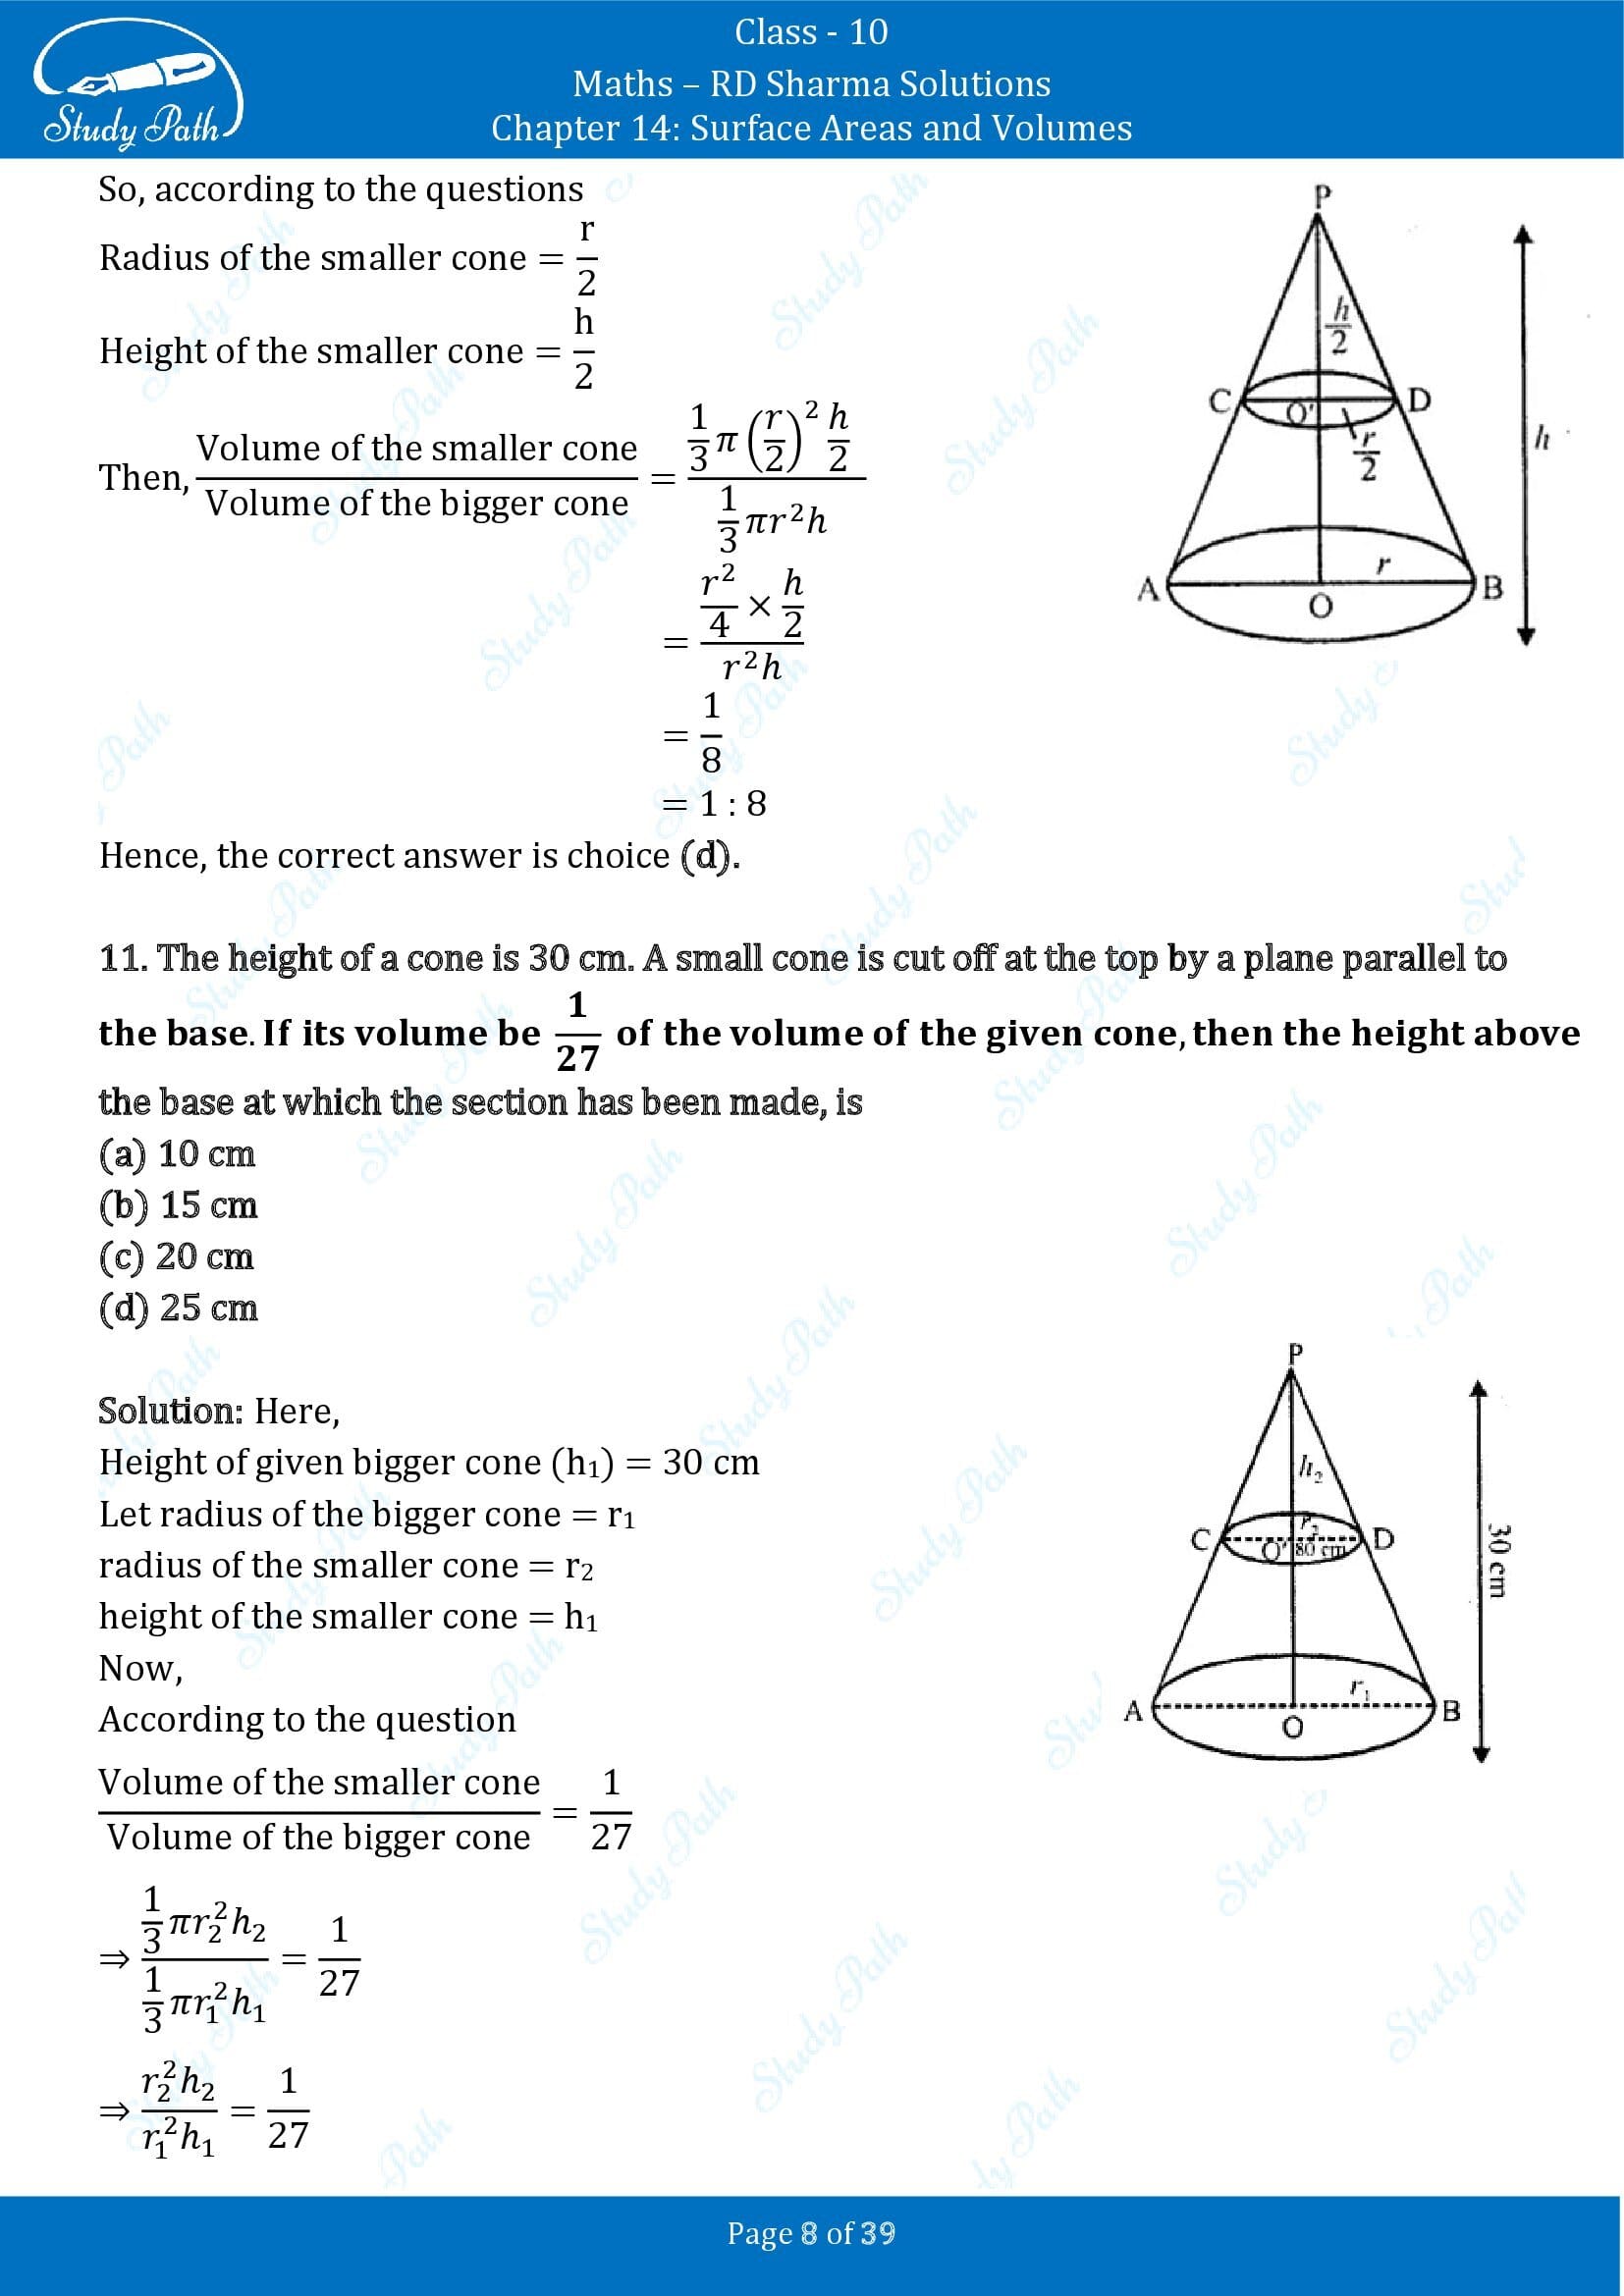 RD Sharma Solutions Class 10 Chapter 14 Surface Areas and Volumes Multiple Choice Question MCQs 00008